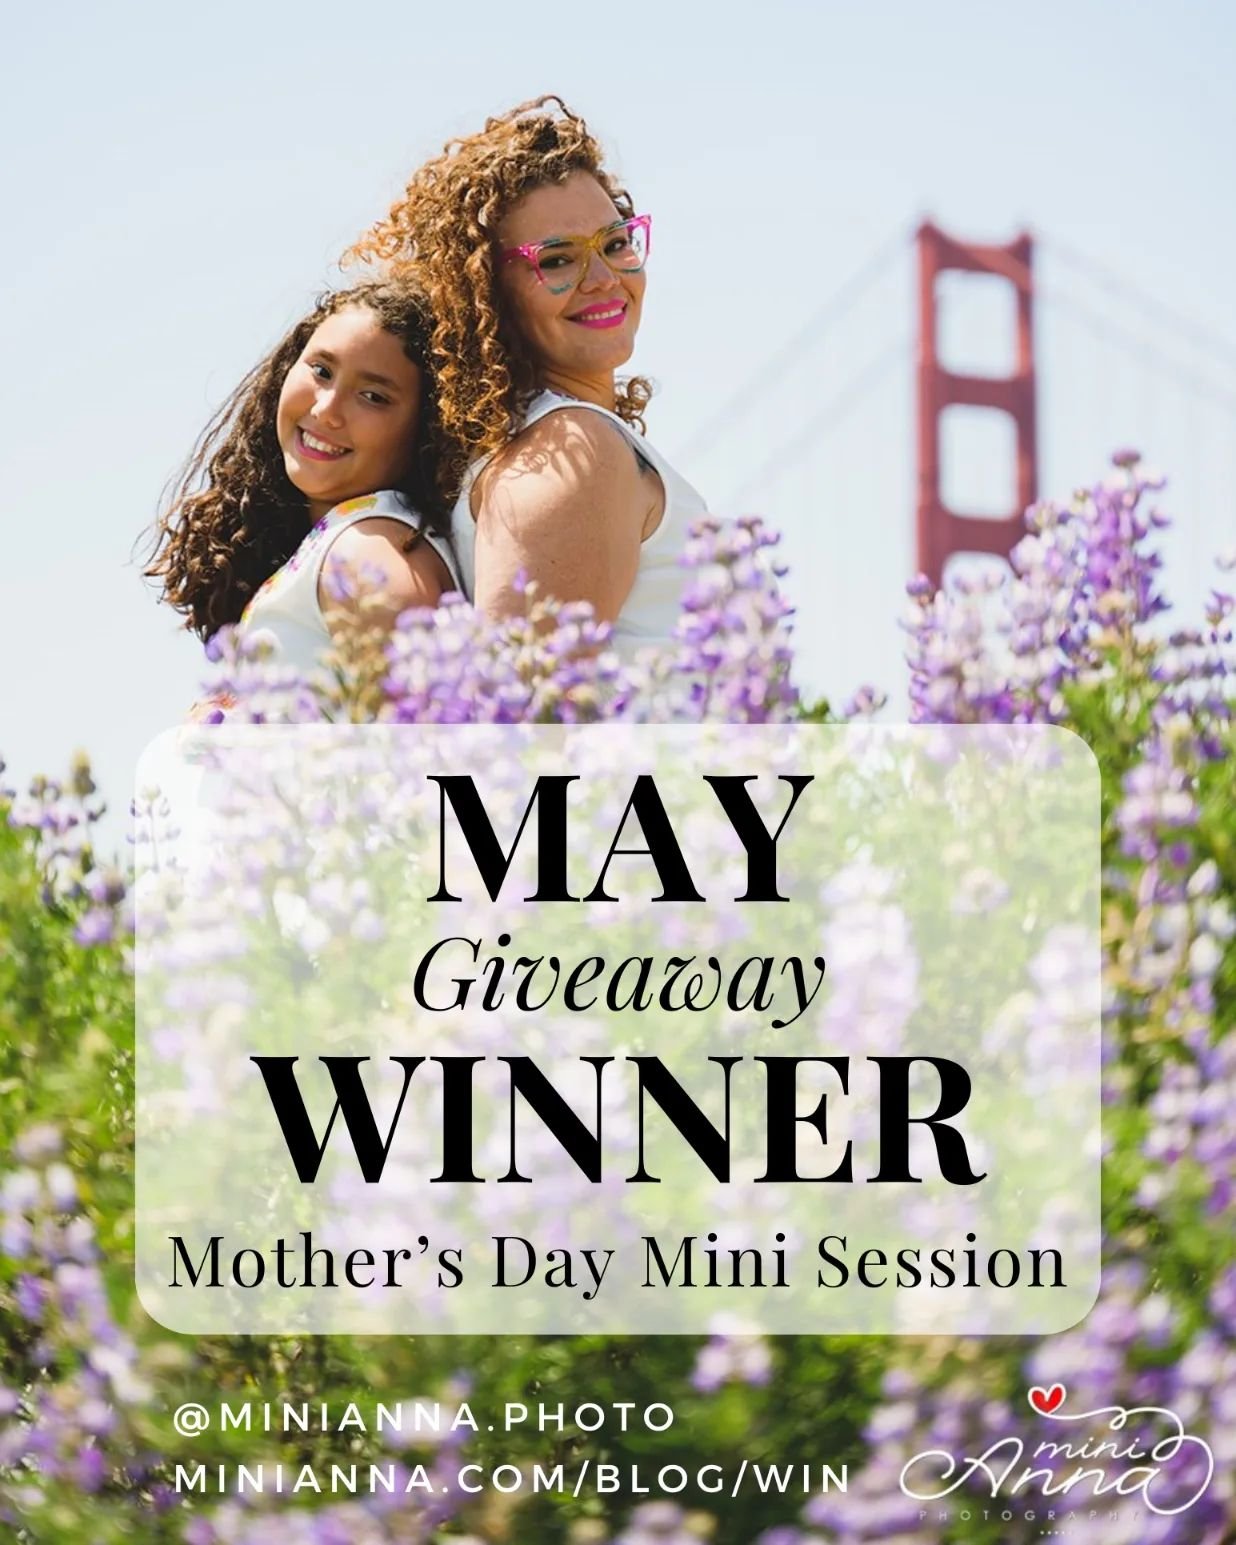 This is the moment you have been waiting for! Winner announcement! 
...
And the winner is...
@thwang !!!
Congrats Tiffany! You have 24 hours to respond and get your spot at the Mother's Day Pop Up Mini Session on May 11th. 

Next month's giveaway pos